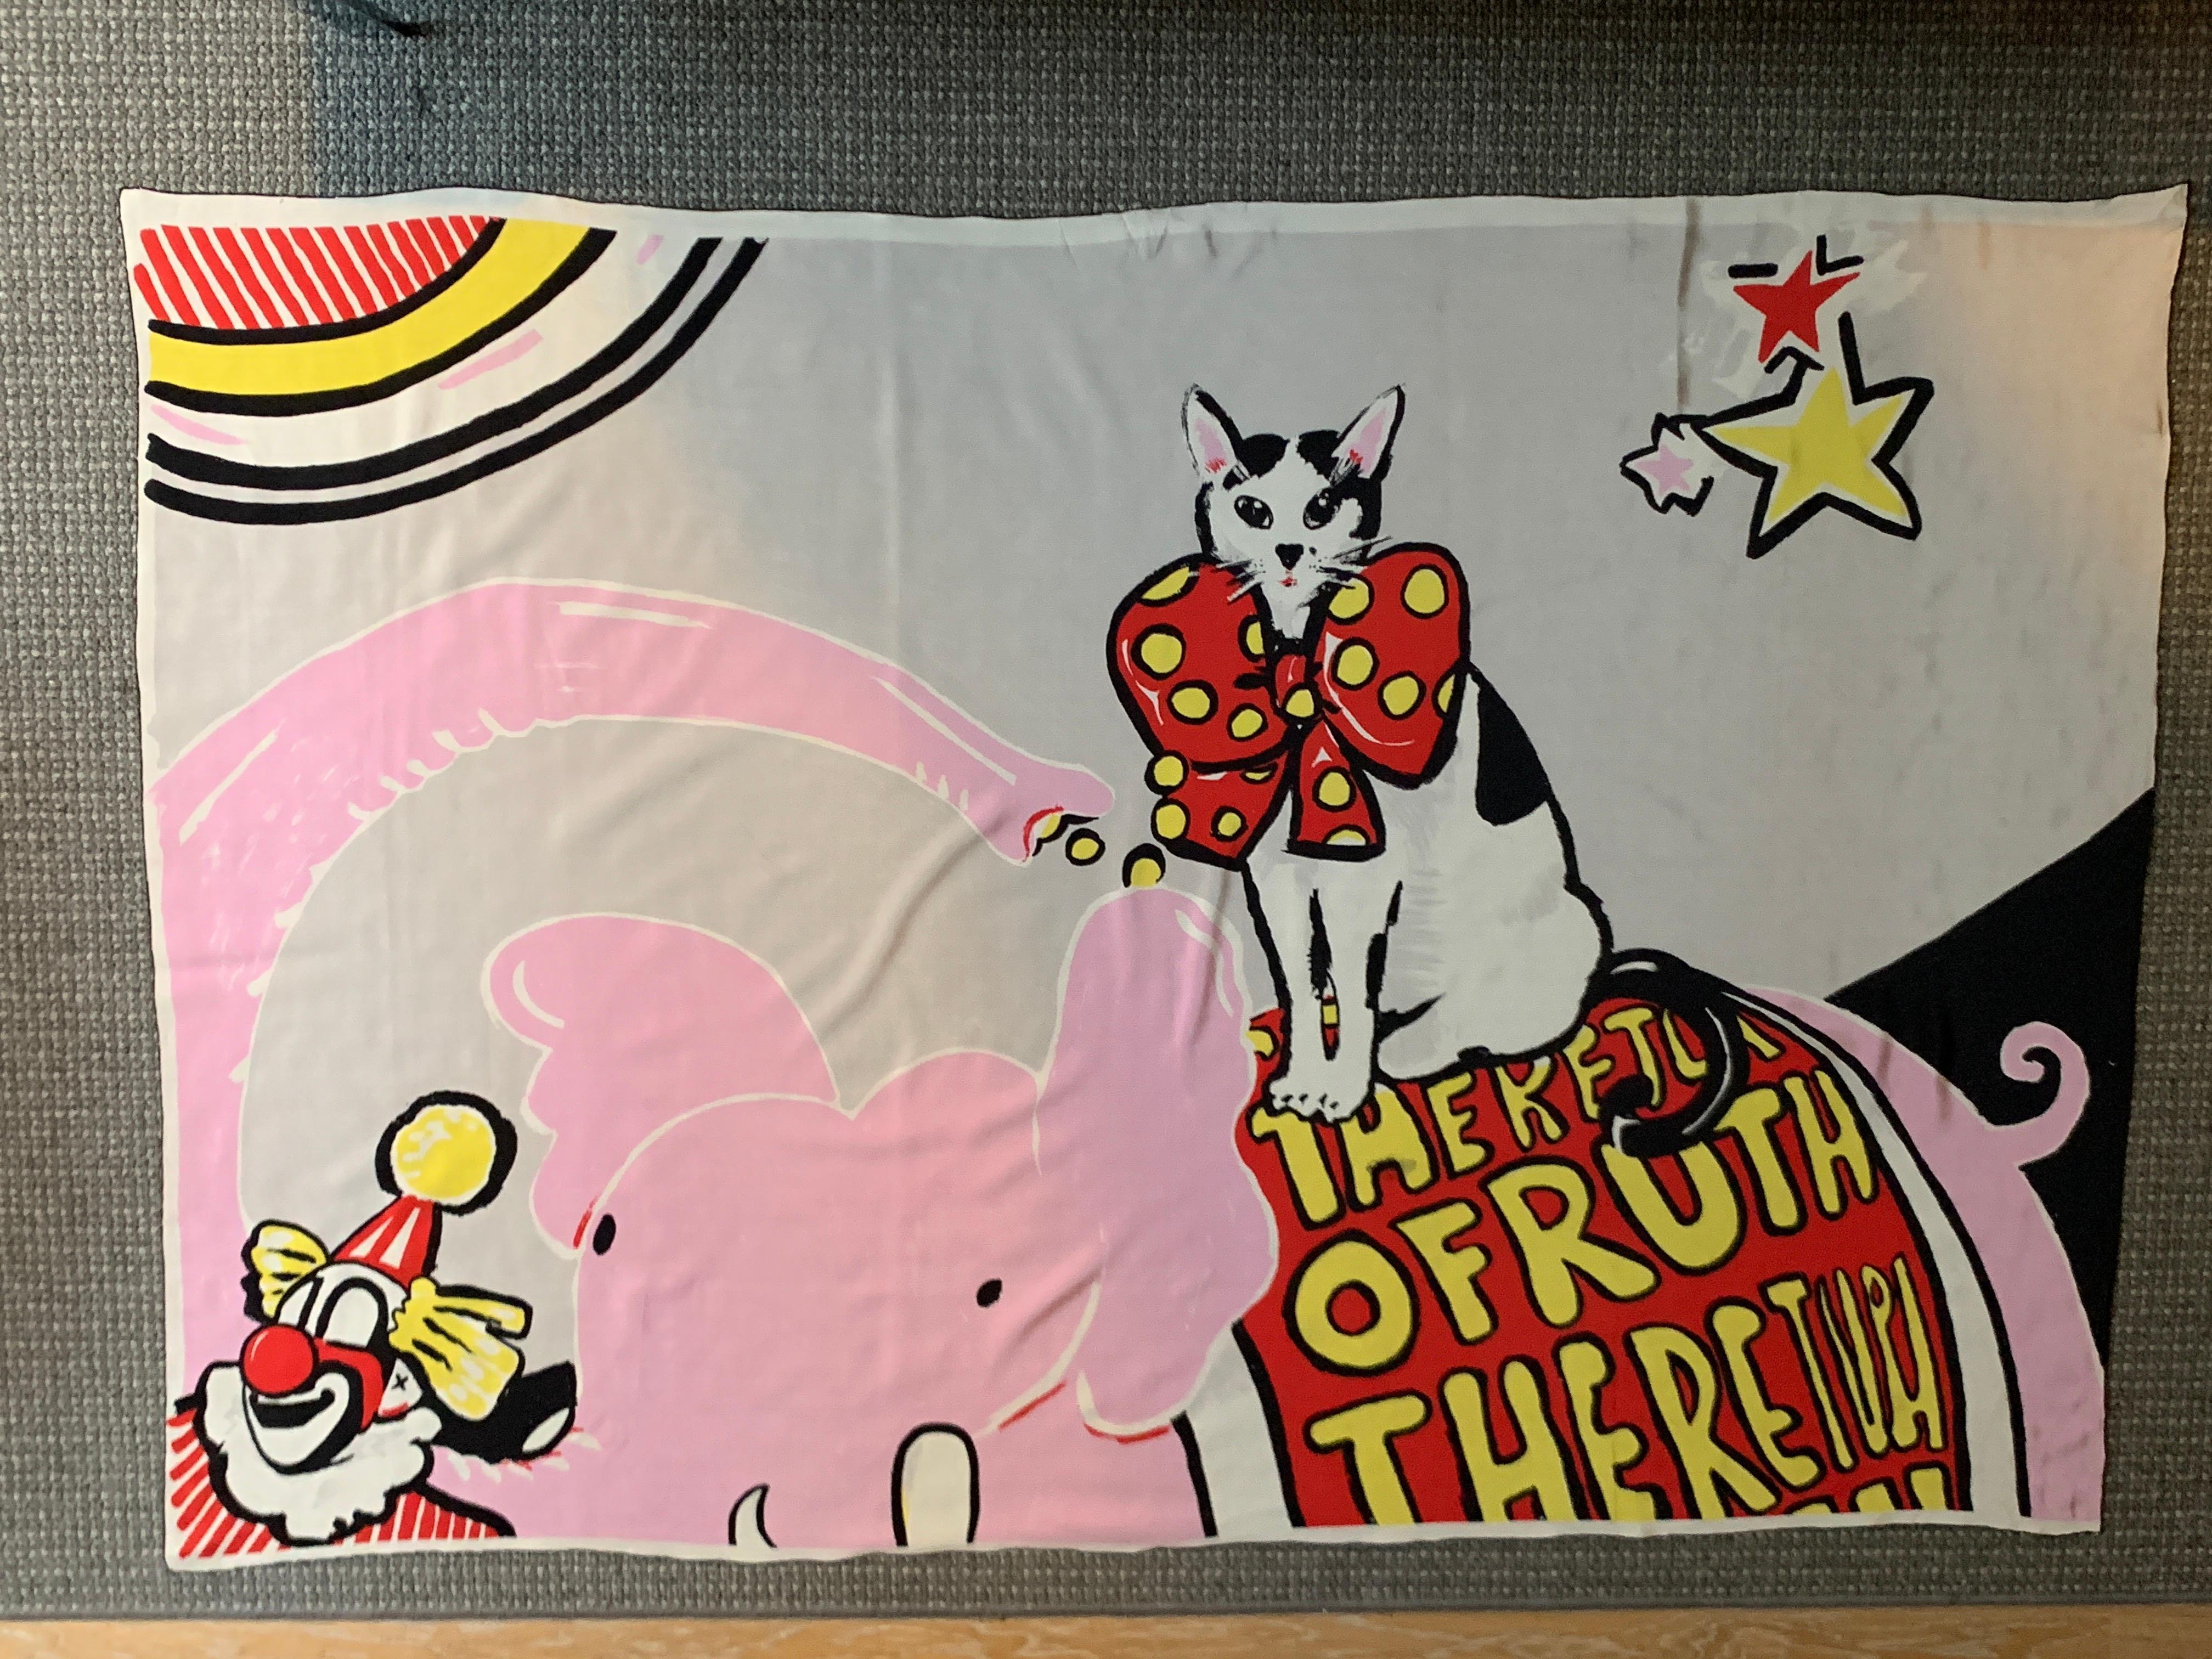 Huge Michael Vollbrach vintage scarf or sarong featuring his iconic mascot,  Ruth the Cat. In this whimsical illustration, Ruth the Cat is seen at the circus riding a pink elephant with a big banner reading 